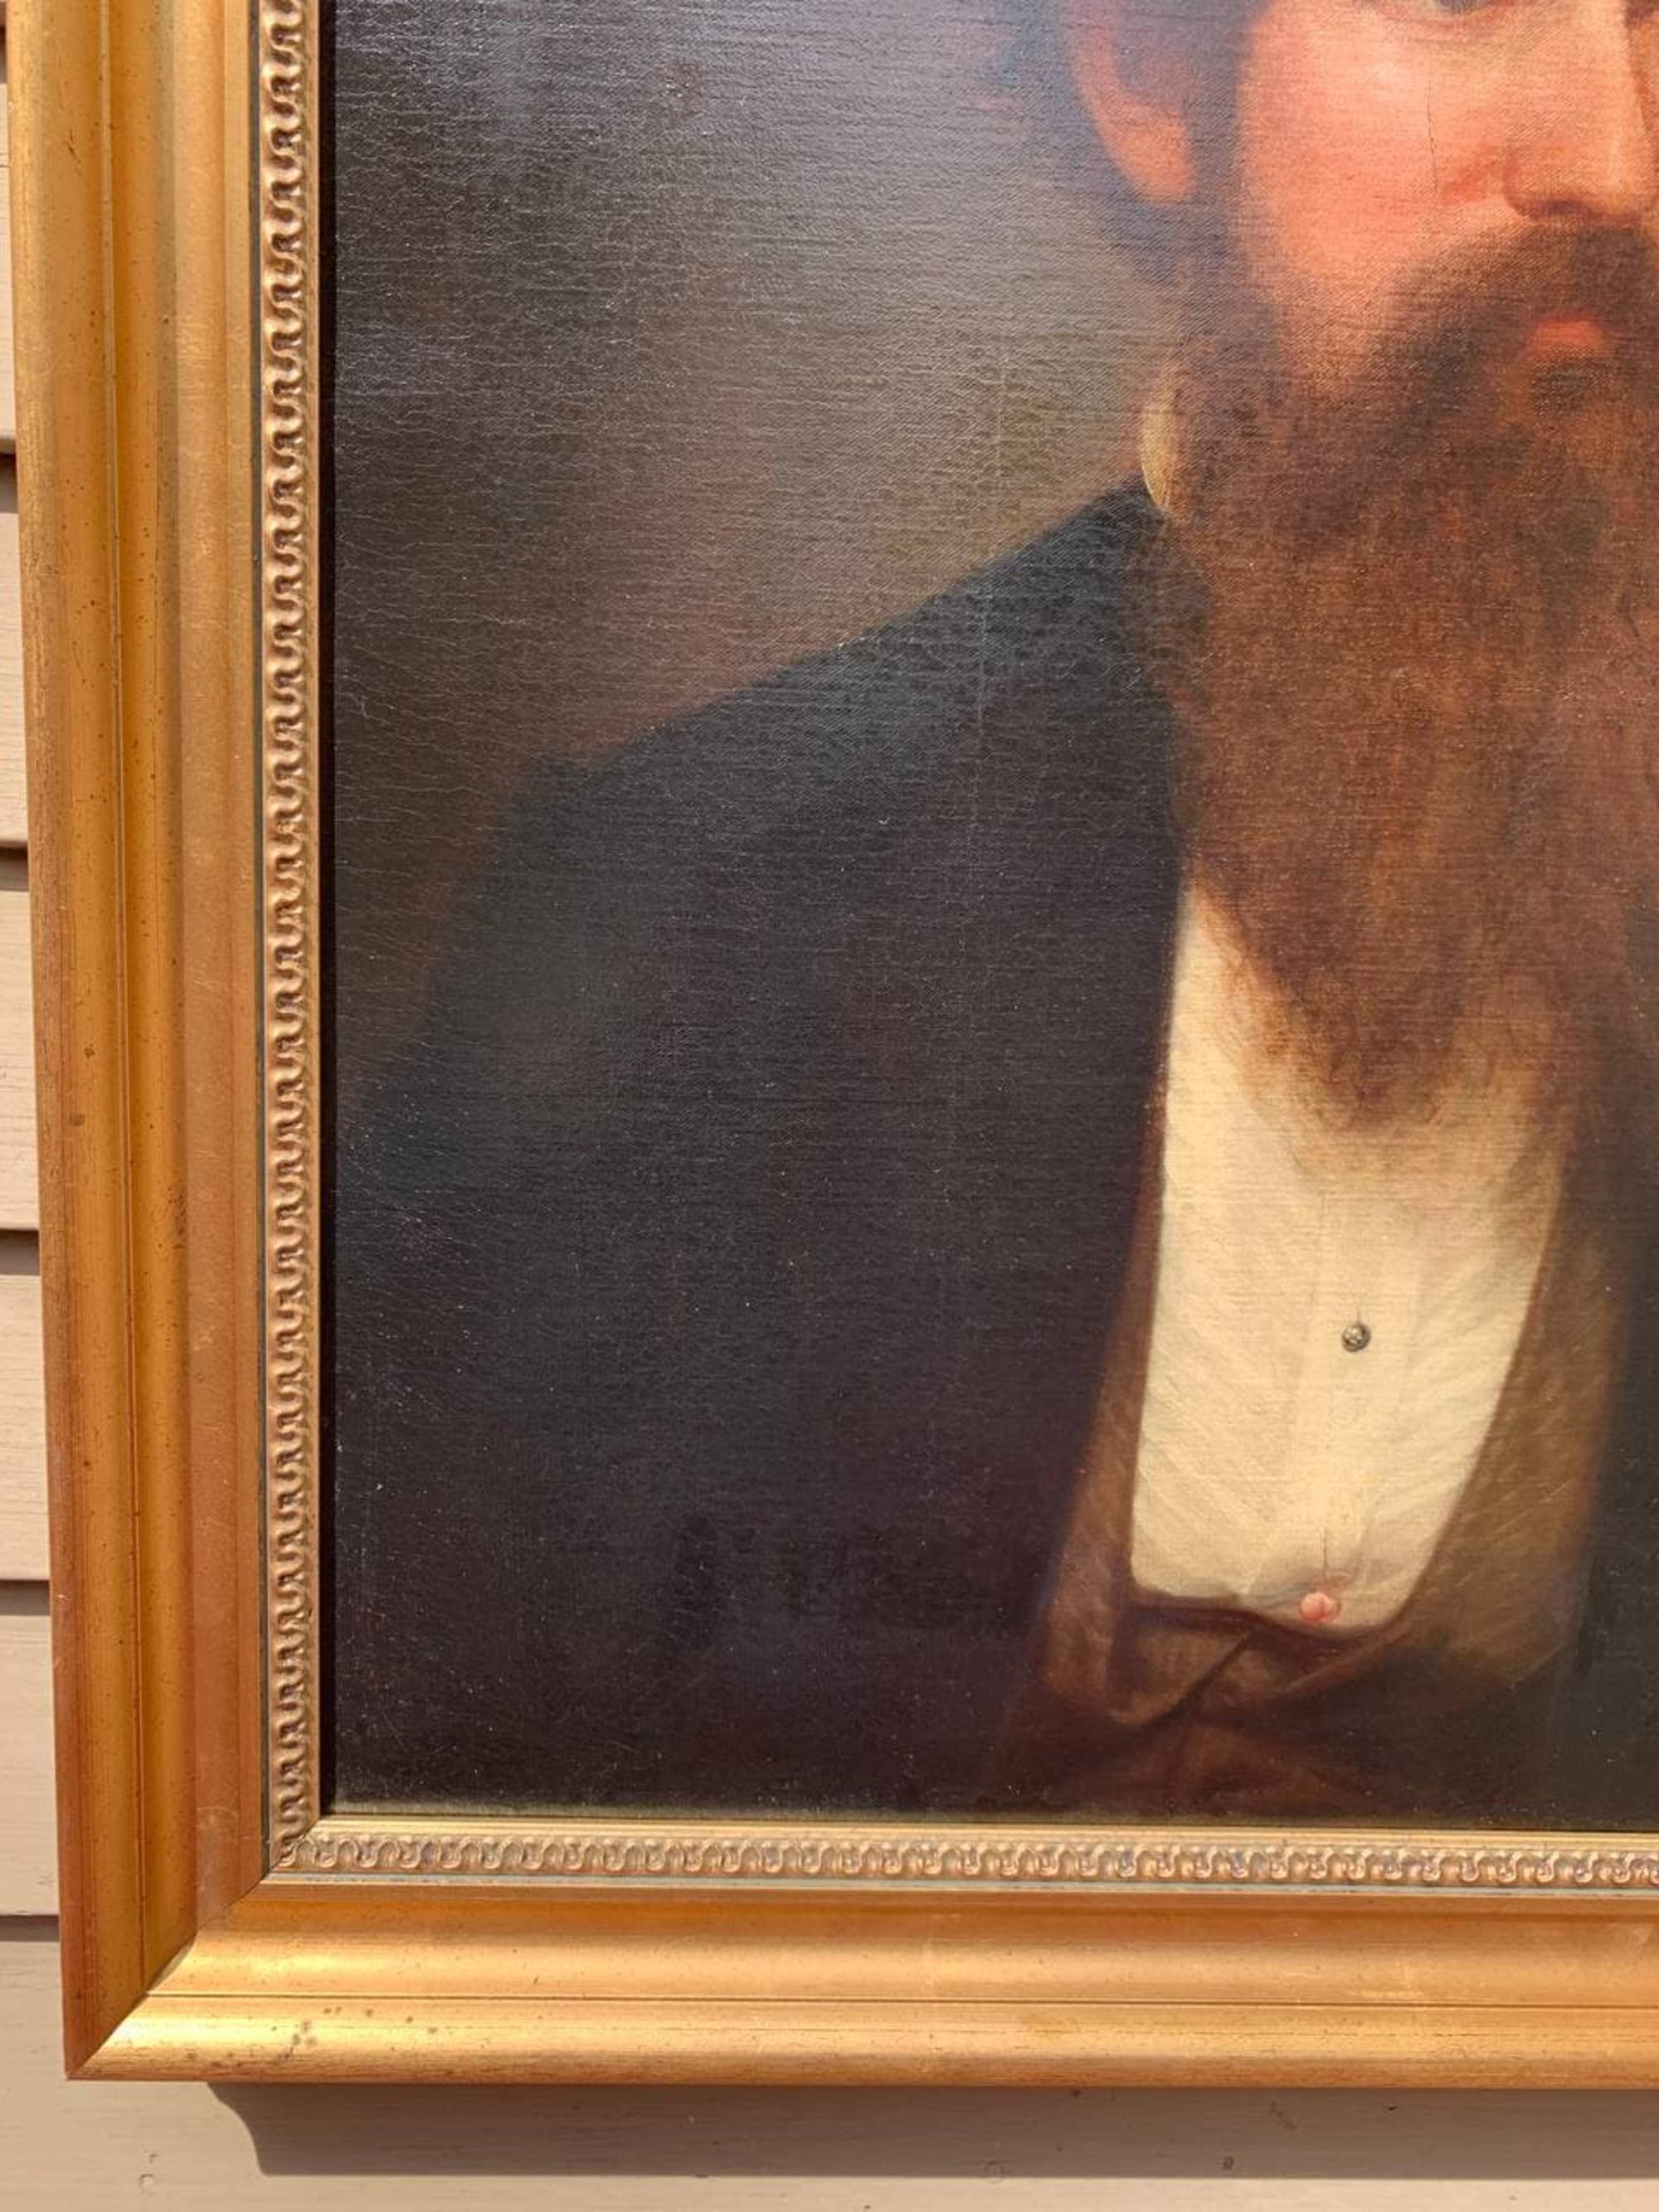 Up for sale is an amazing original antique oil painting on canvas by Famous American Artist Henry Peters Gray (1819-1877), depicting a portrait of a W.P. Wright Esq.

Some of his paintings are exhibited in the Metropolitan Museum of Art, in New